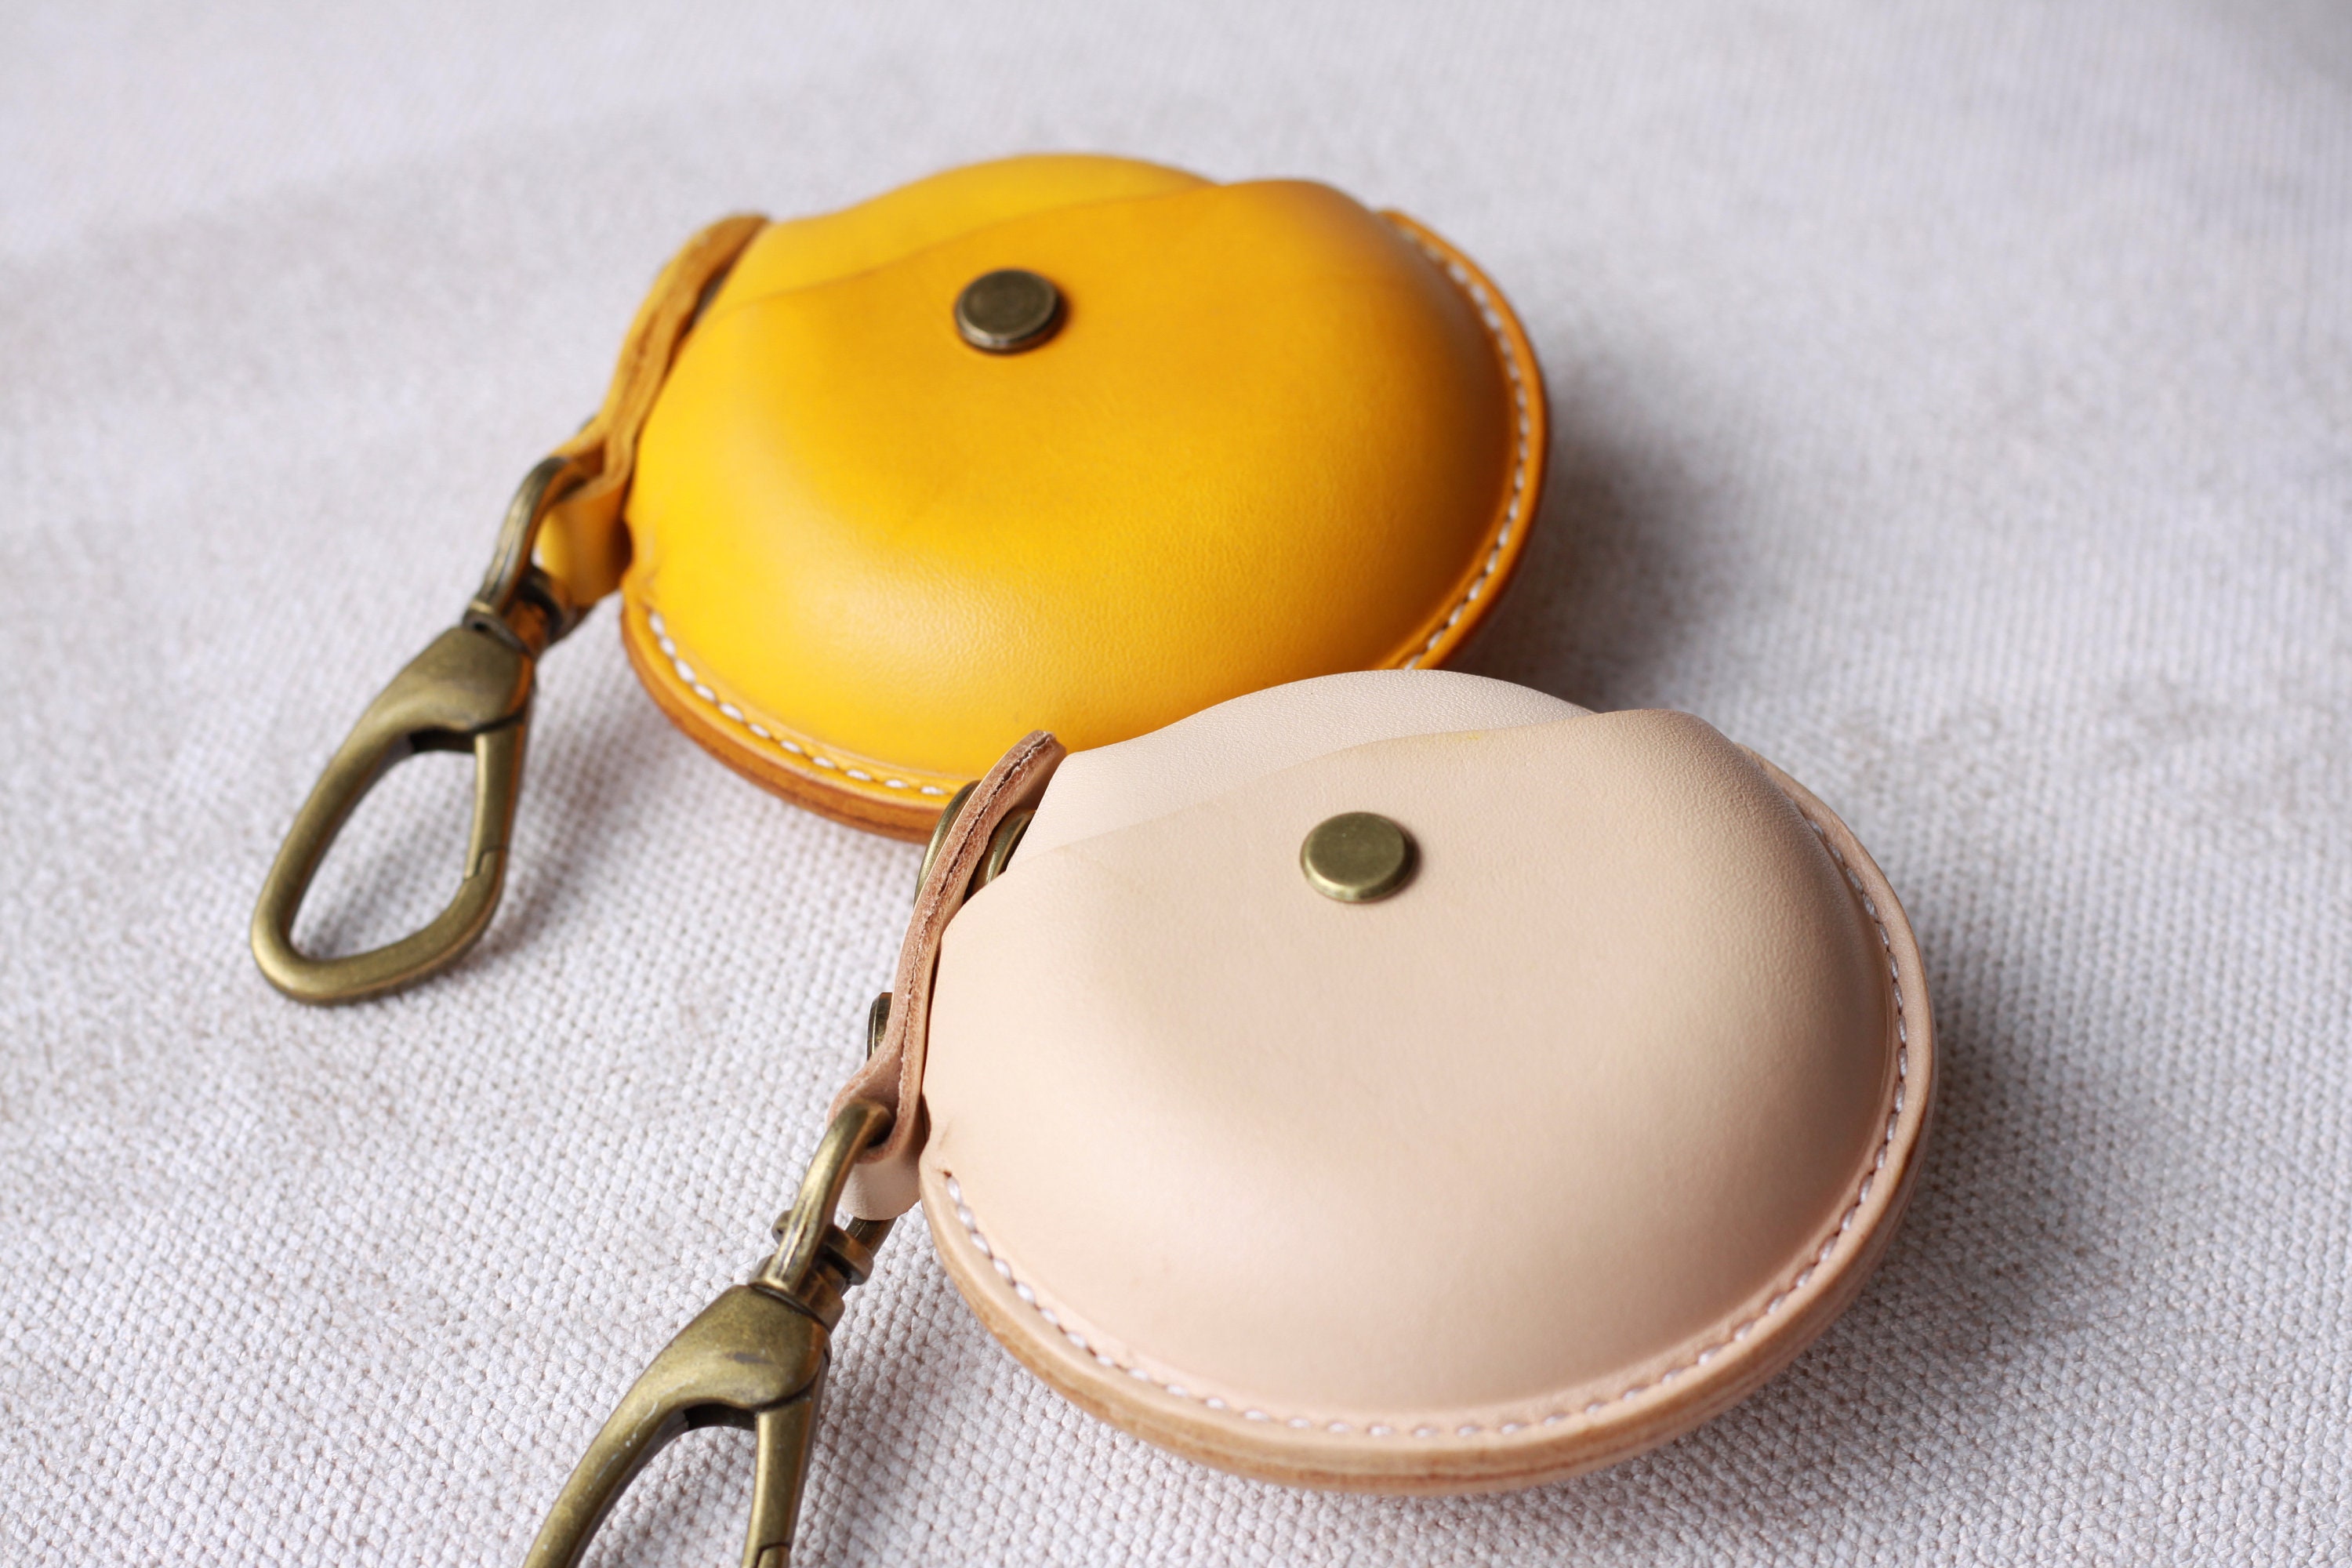 Tom Thumb Coin Purse Leather Craft Kit - Make Your Own Small